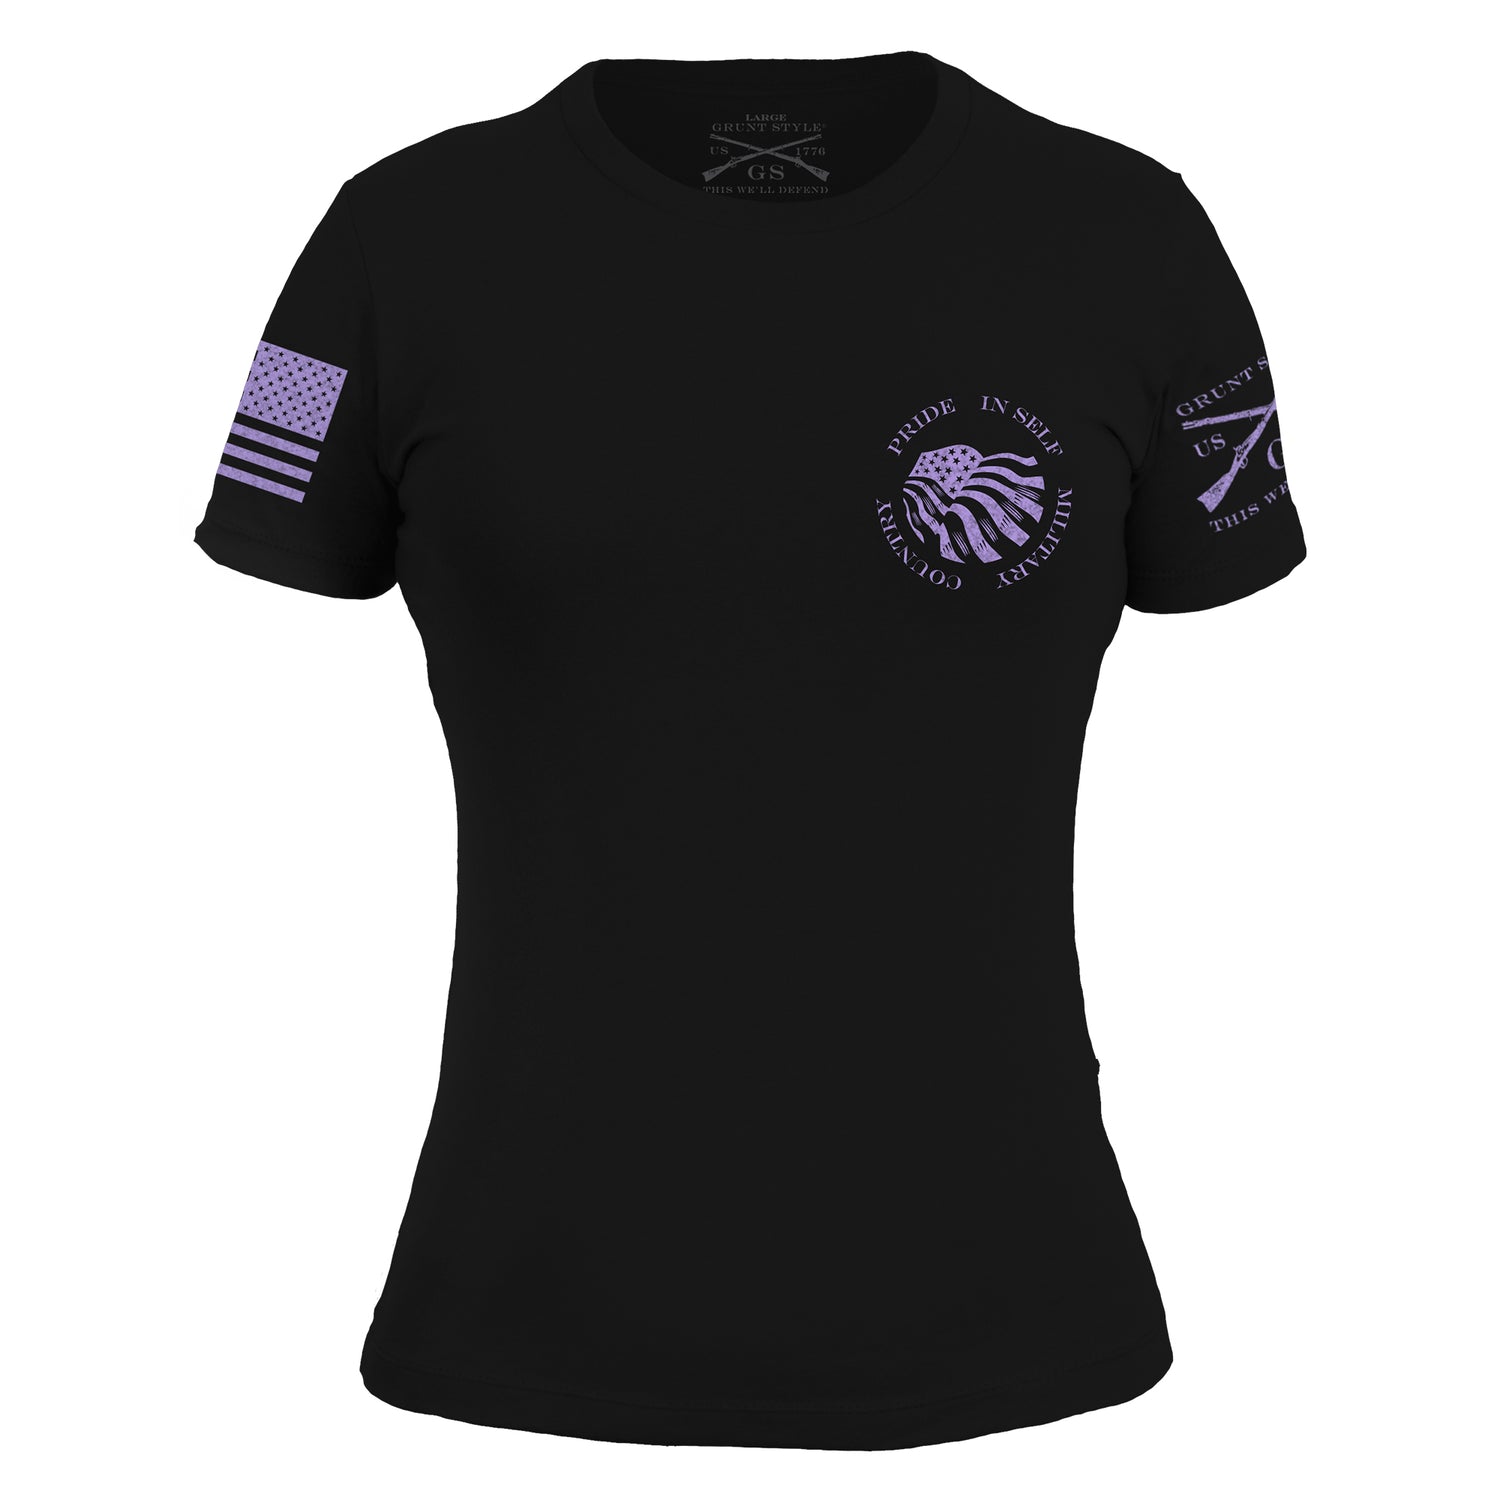 Women's Flag Salute Black and Lavender Tee  | Grunt Style 